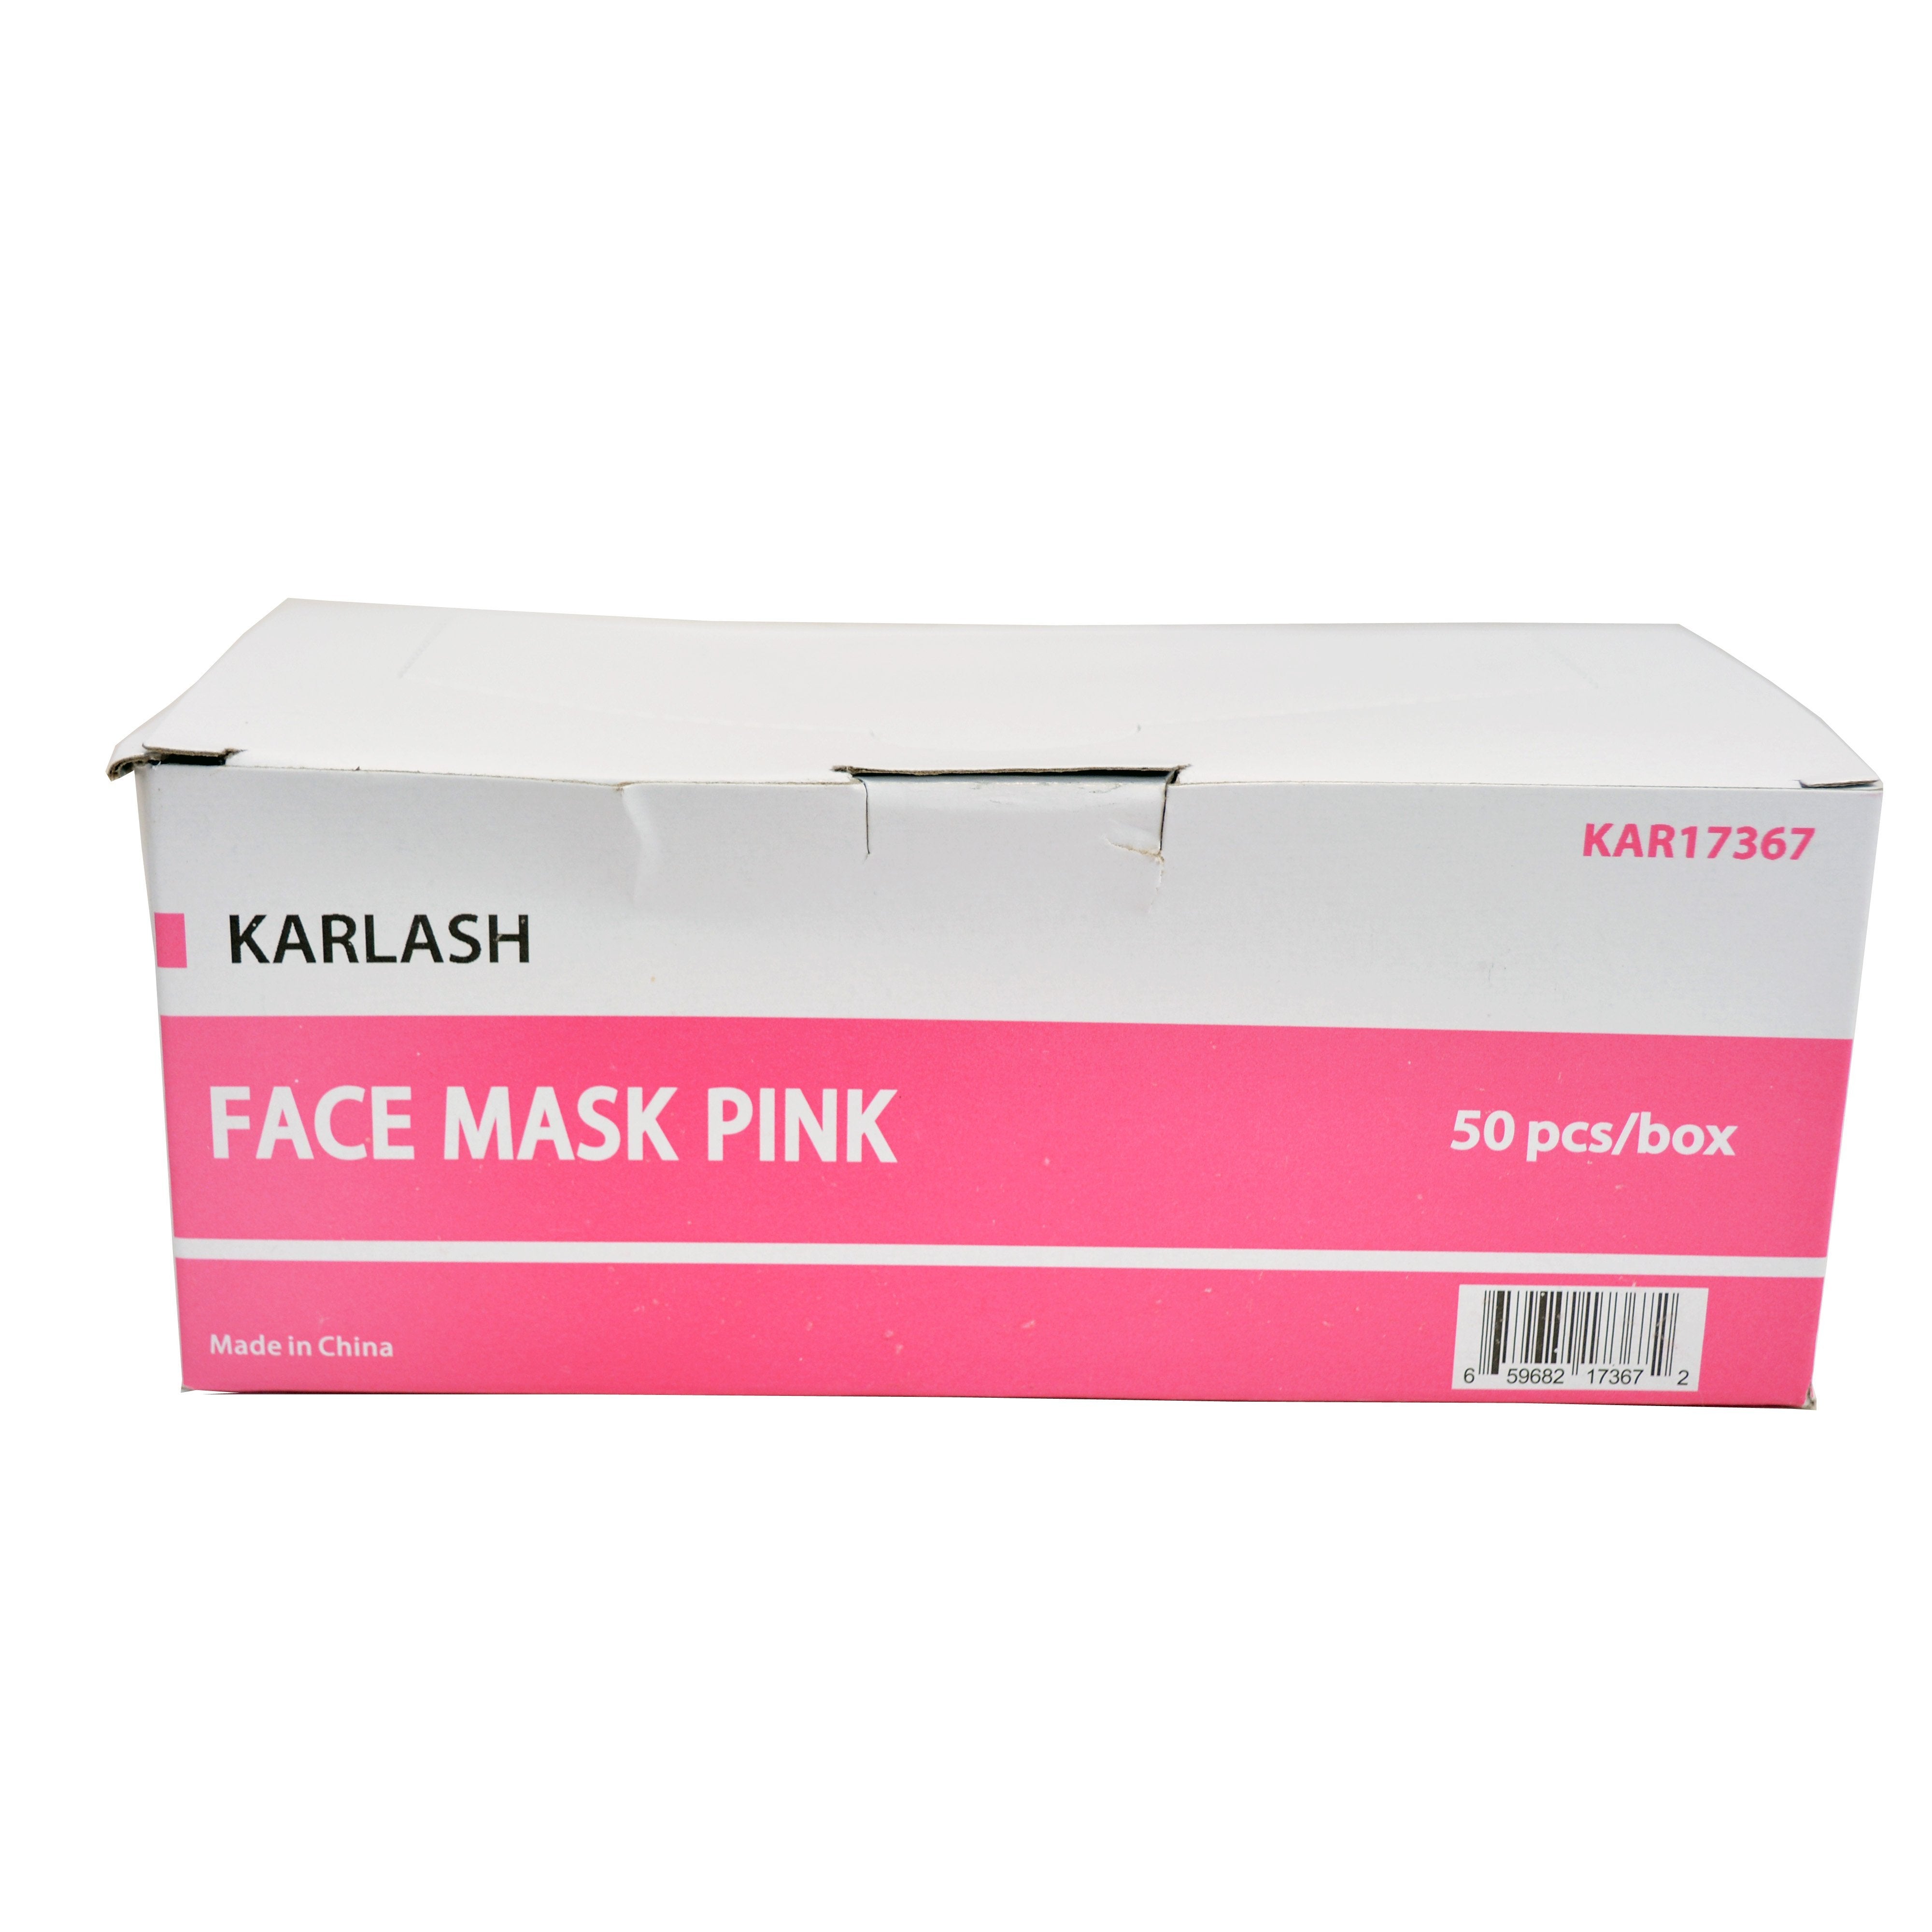 Karlash Four Layer 4-Ply Disposable Earloop Face Mask Filter Antivirus Bacteria Pink - 50 Pieces